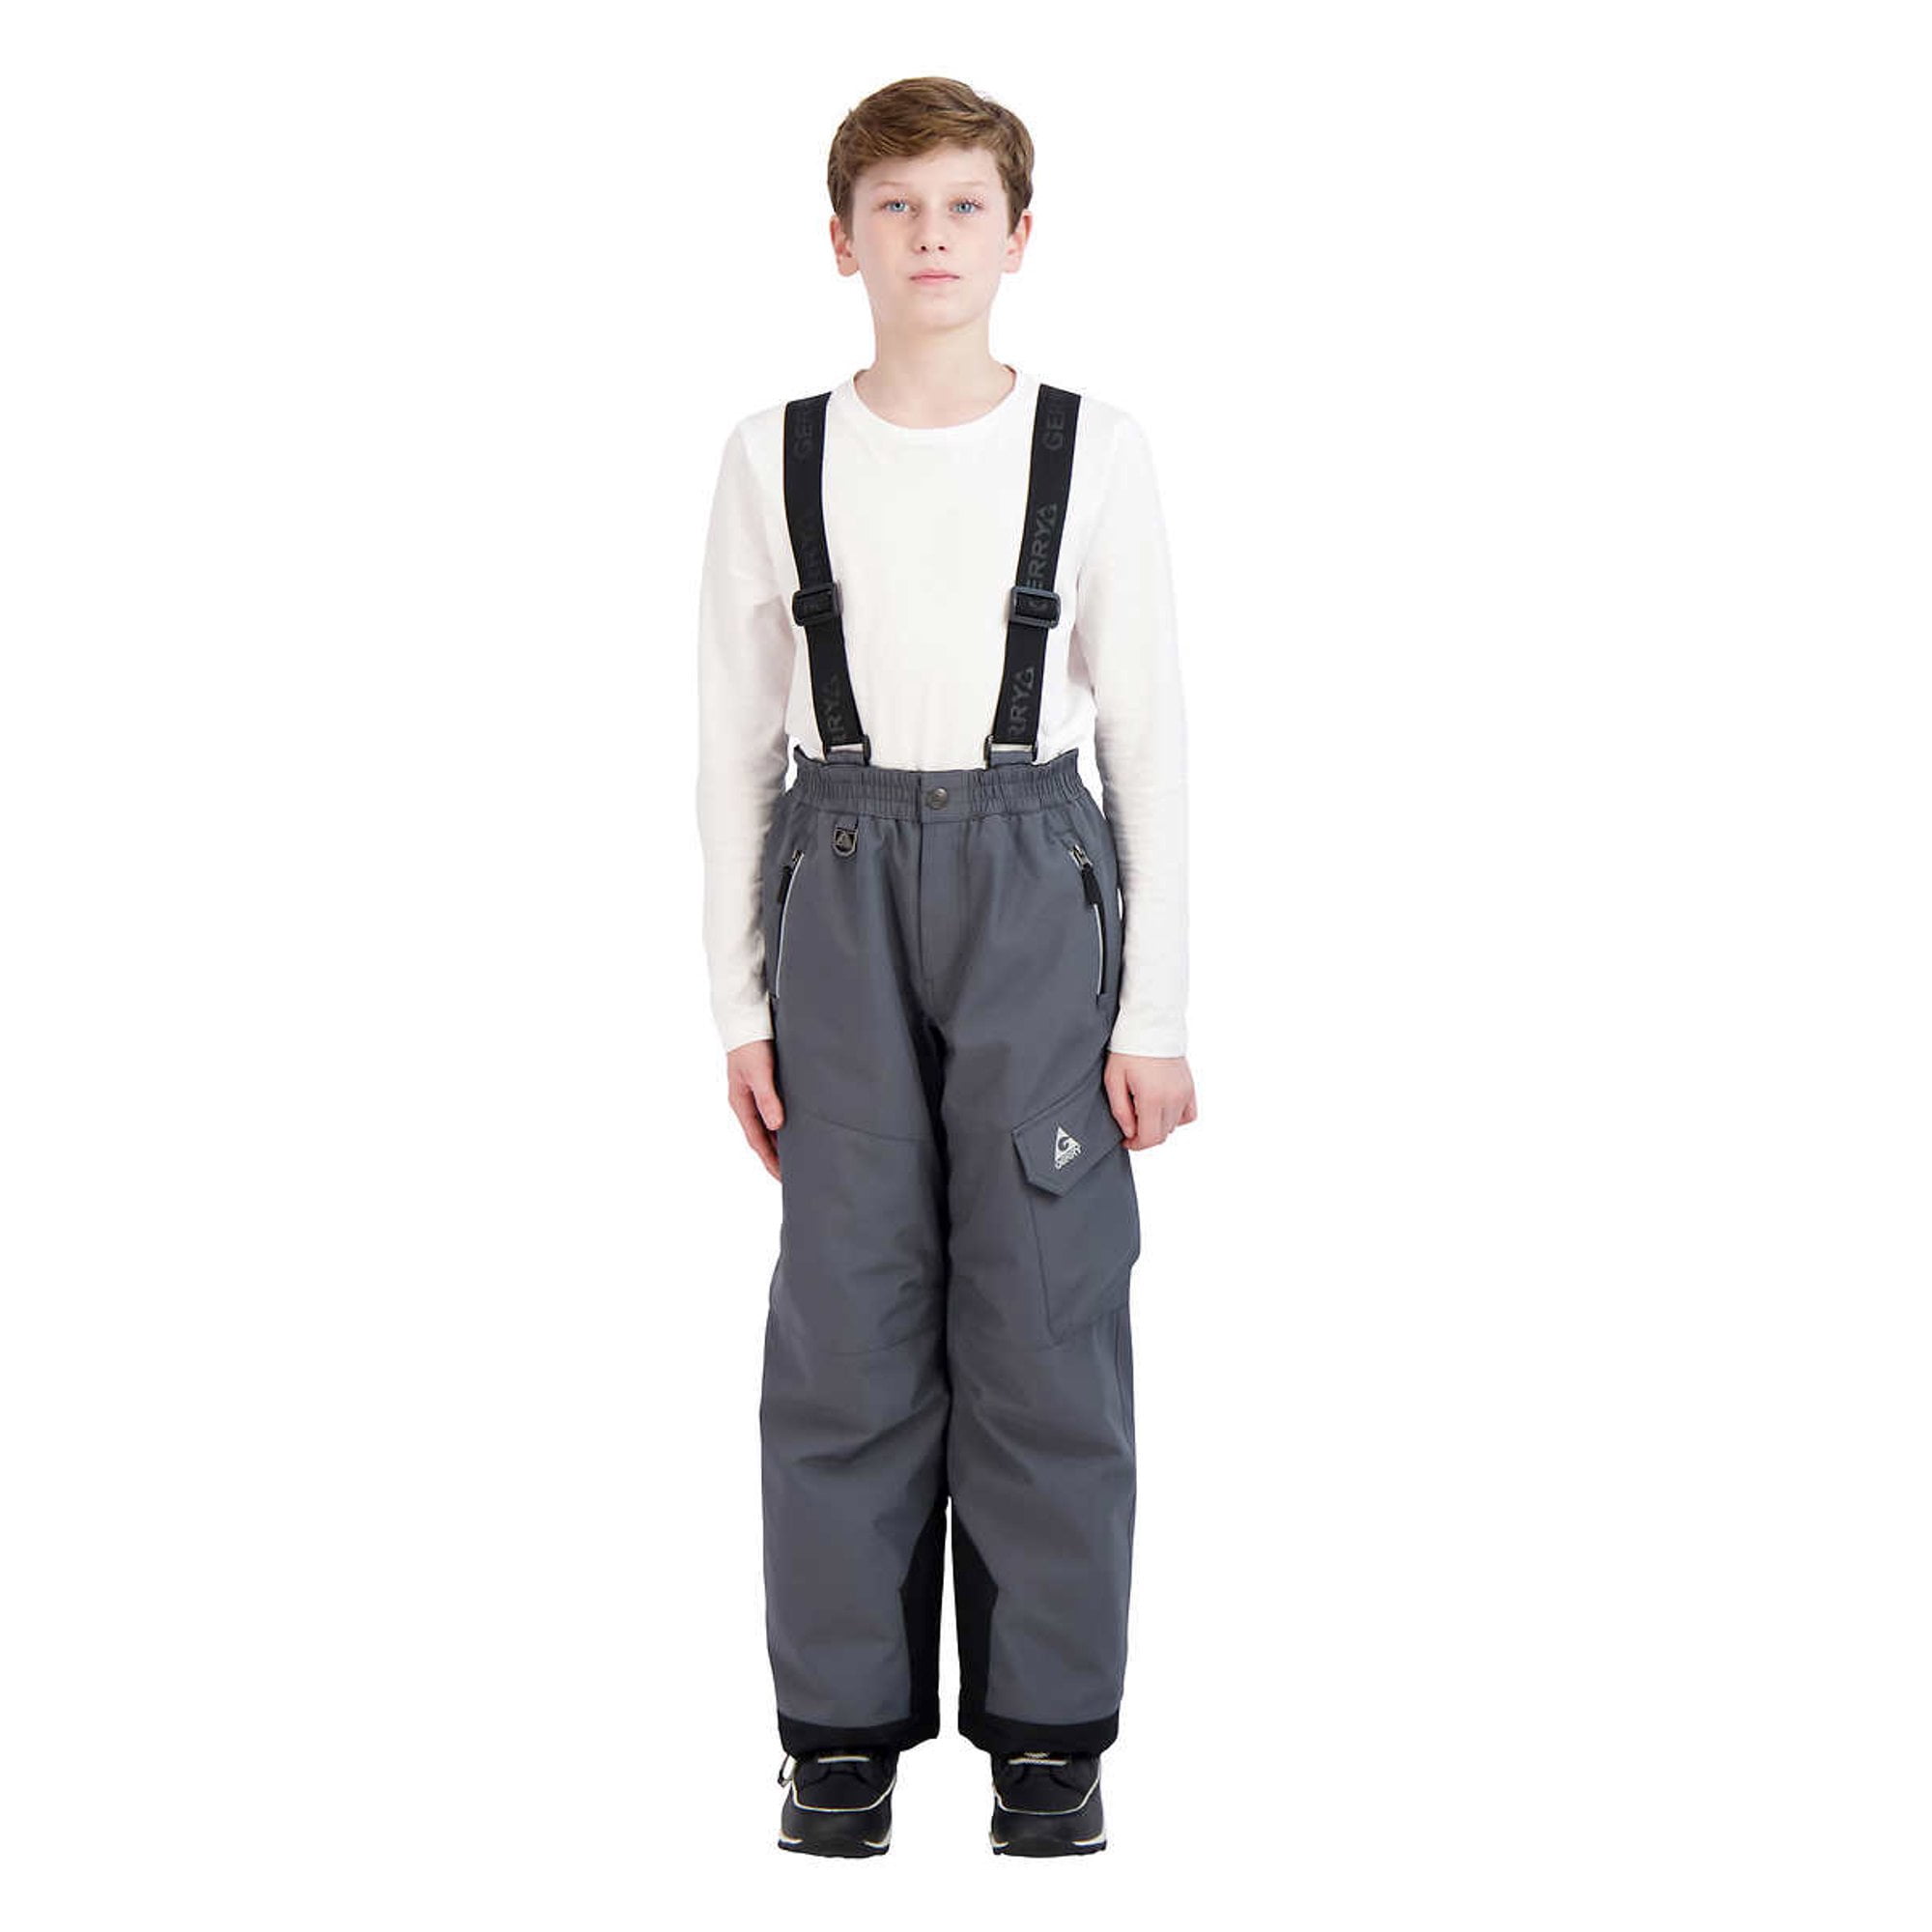 Gerry Kids Girls' Performance Snow Pant with Adjustable Suspenders